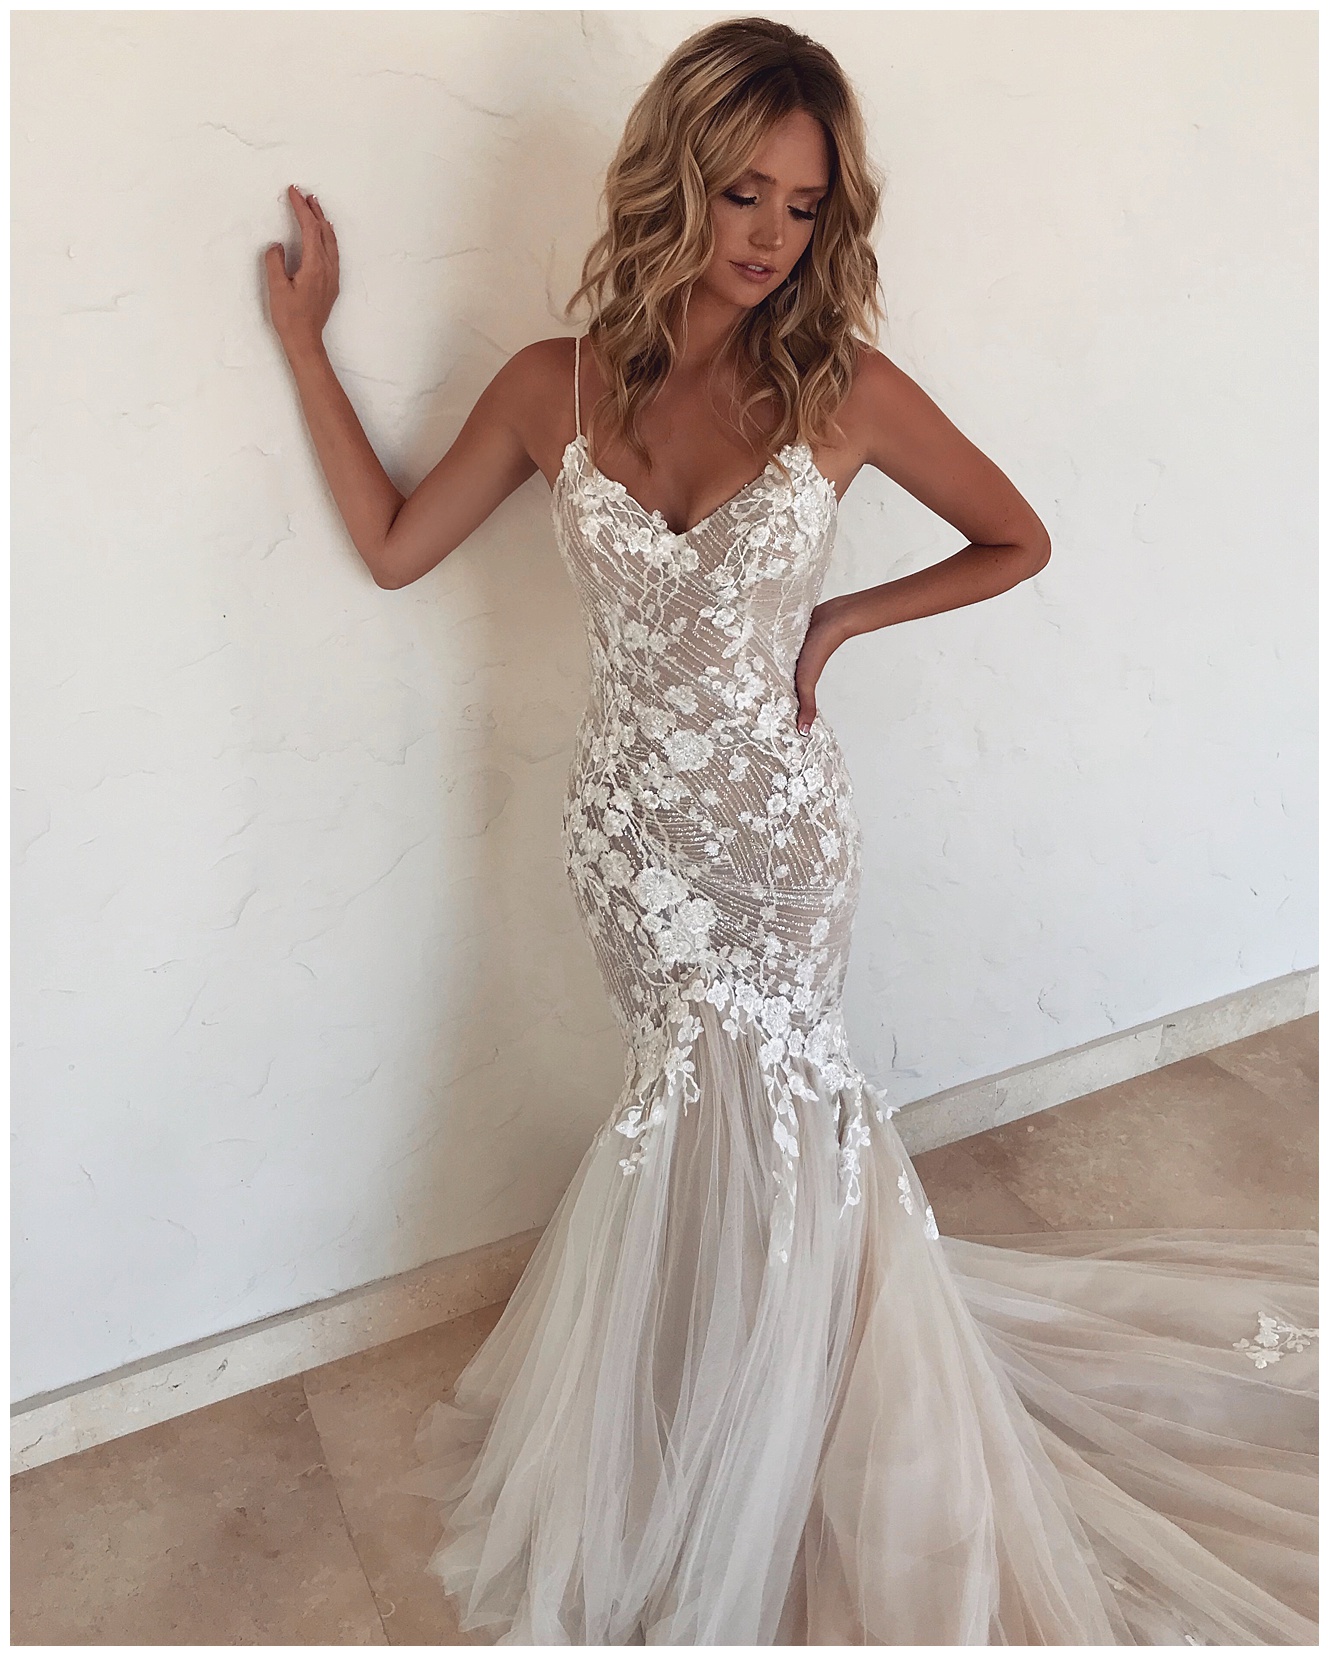 2019 fit and flare wedding dresses